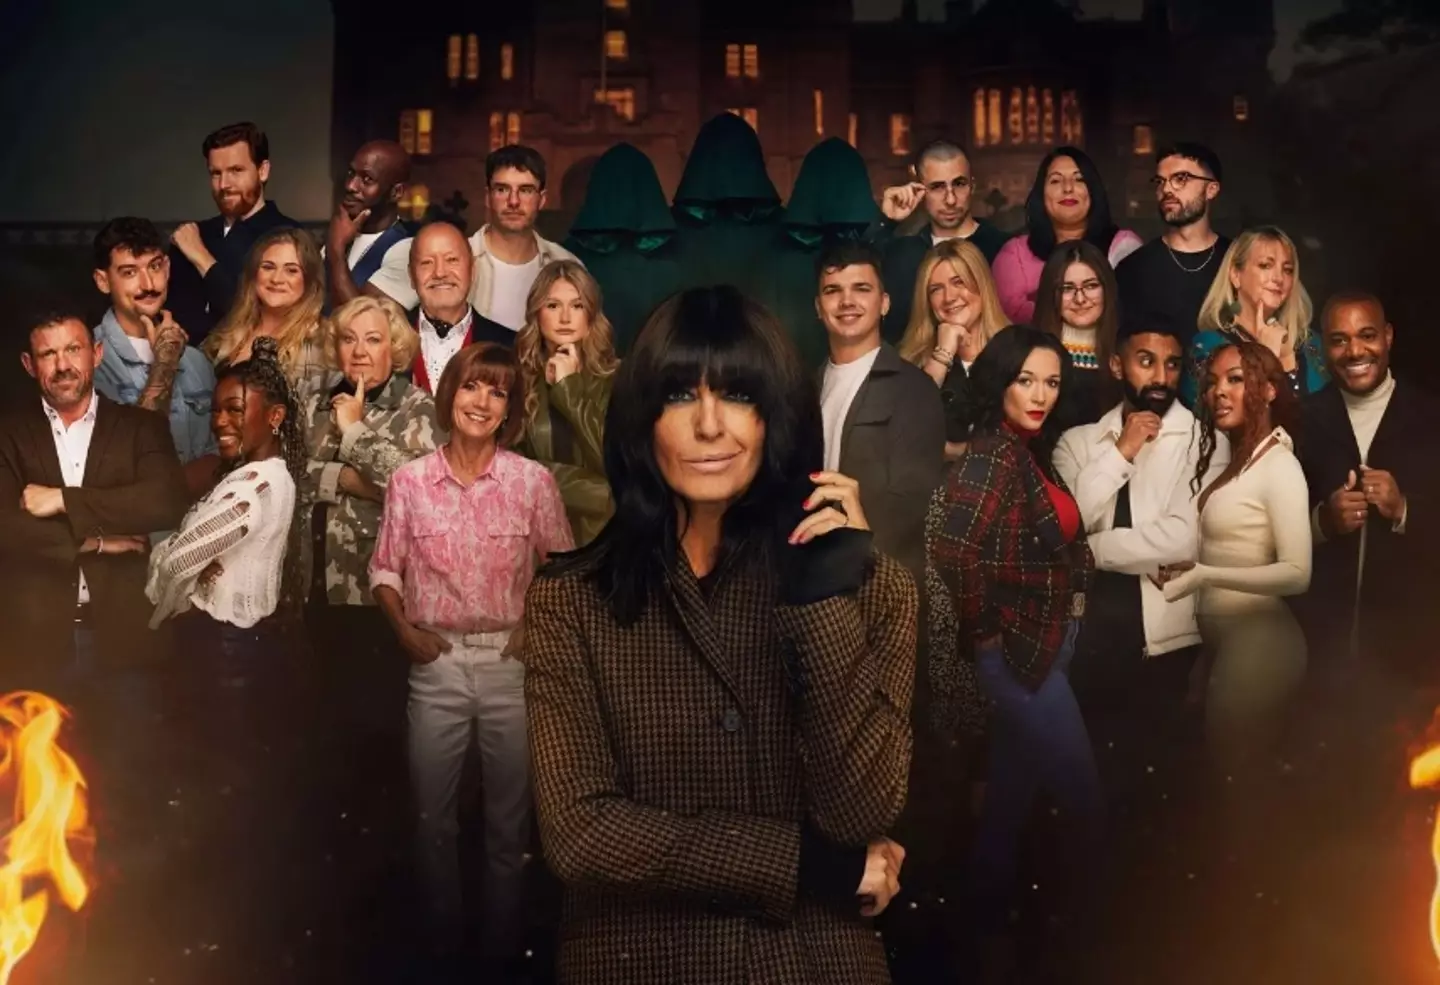 Claudia Winkleman agreed with one fan's issue with the show.